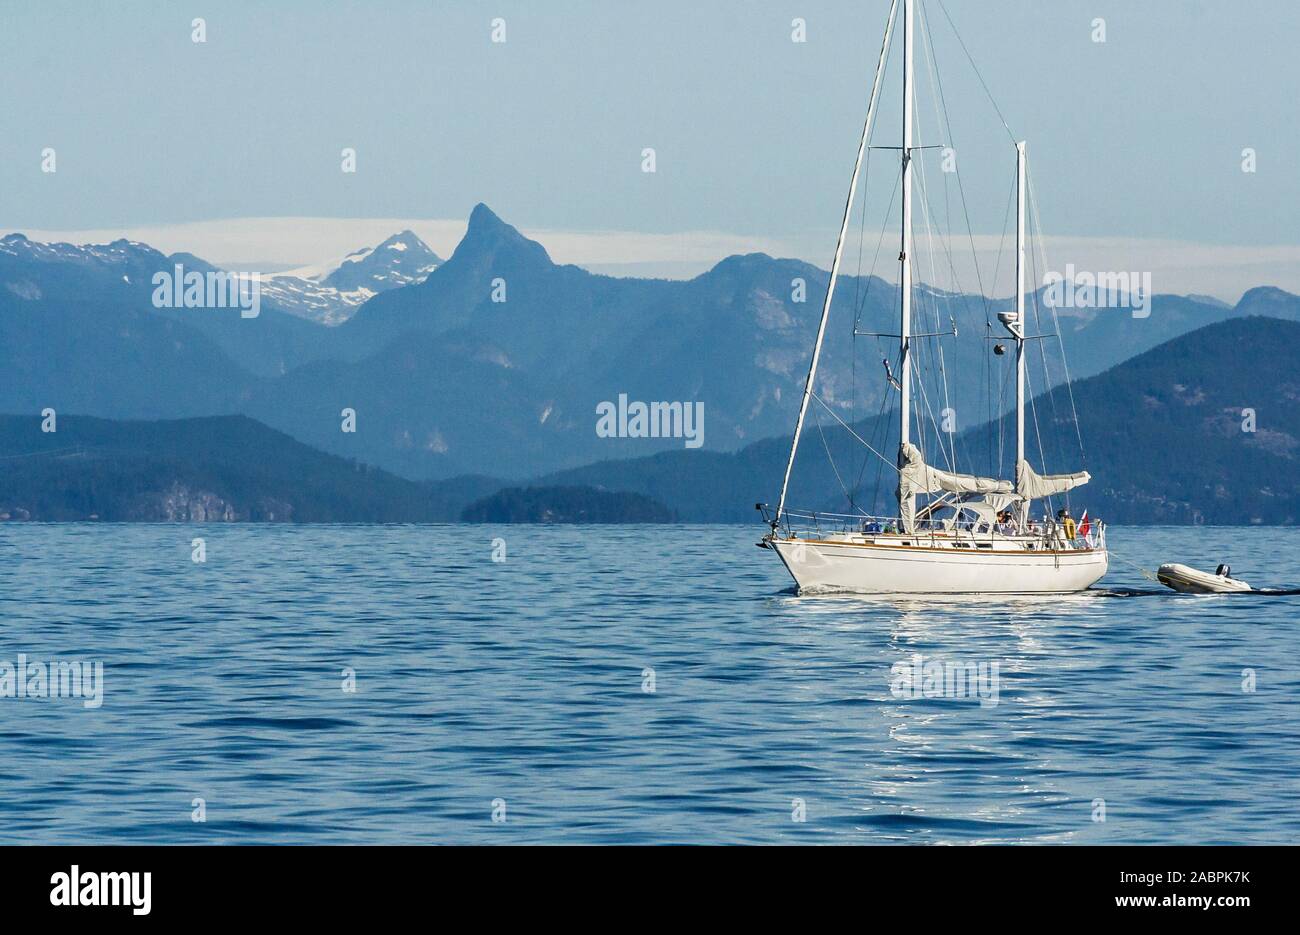 A Canadian sailboat is underway, motoring along on a beautiful summer's day in BC's Desolation Sound, with steep mountains rising in the background. Stock Photo